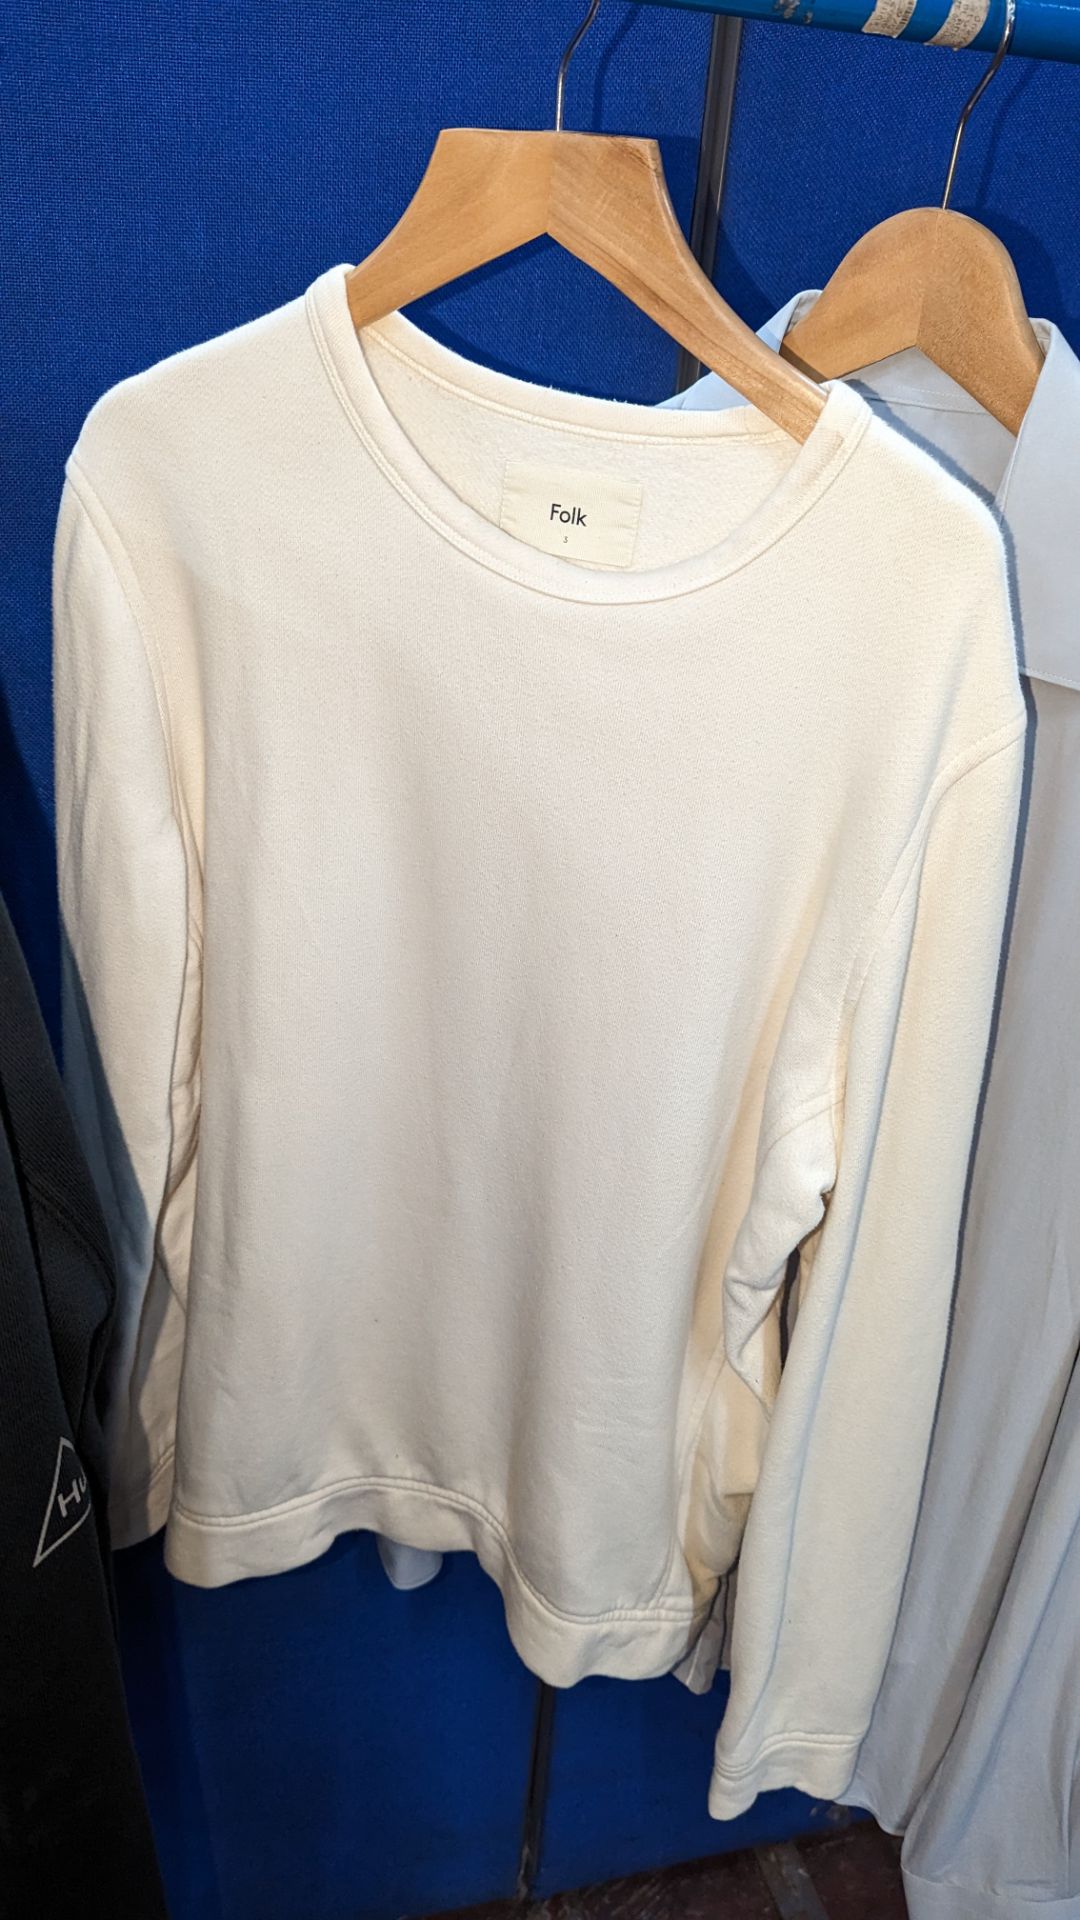 4 assorted men's tops by Adidas, Reiss, Folk & others. NB the hangers used to display these garment - Image 6 of 11